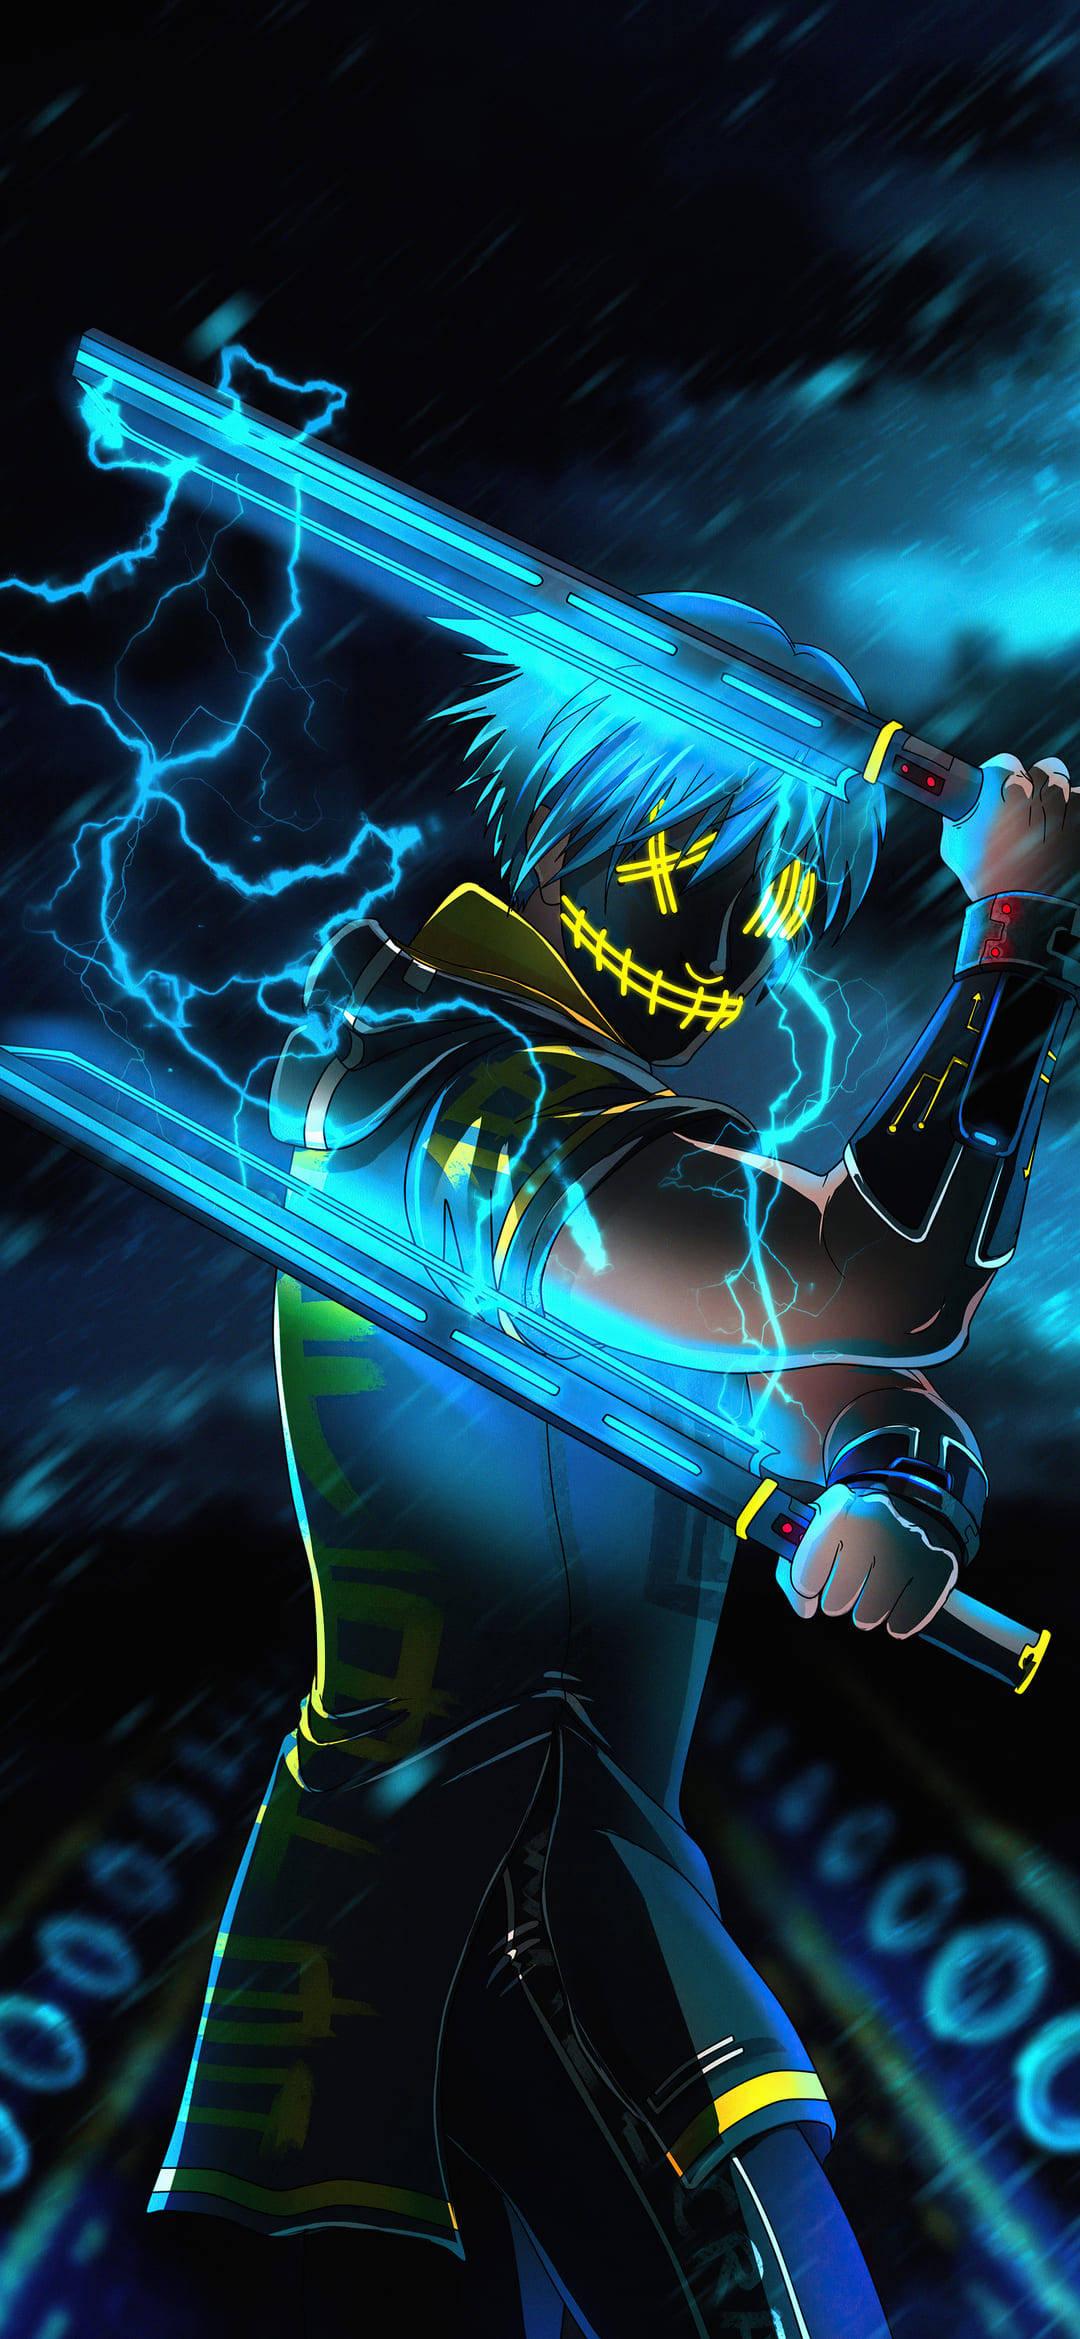 Free download Download Cool Anime Phone Boy With Neon Swords Wallpaper ...